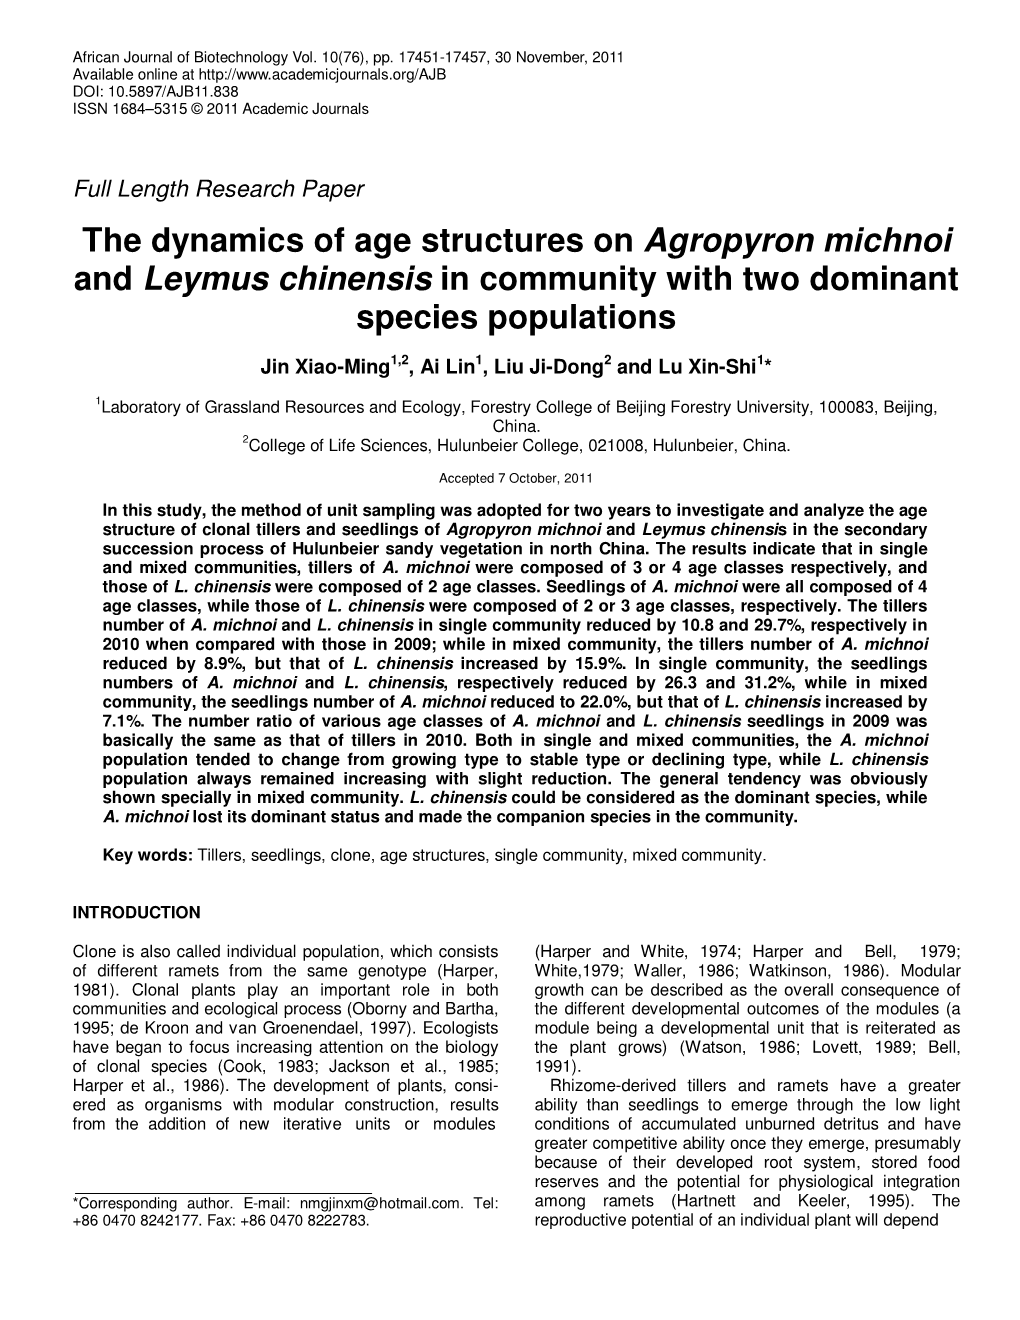 The Dynamics of Age Structures on Agropyron Michnoi and Leymus Chinensis in Community with Two Dominant Species Populations